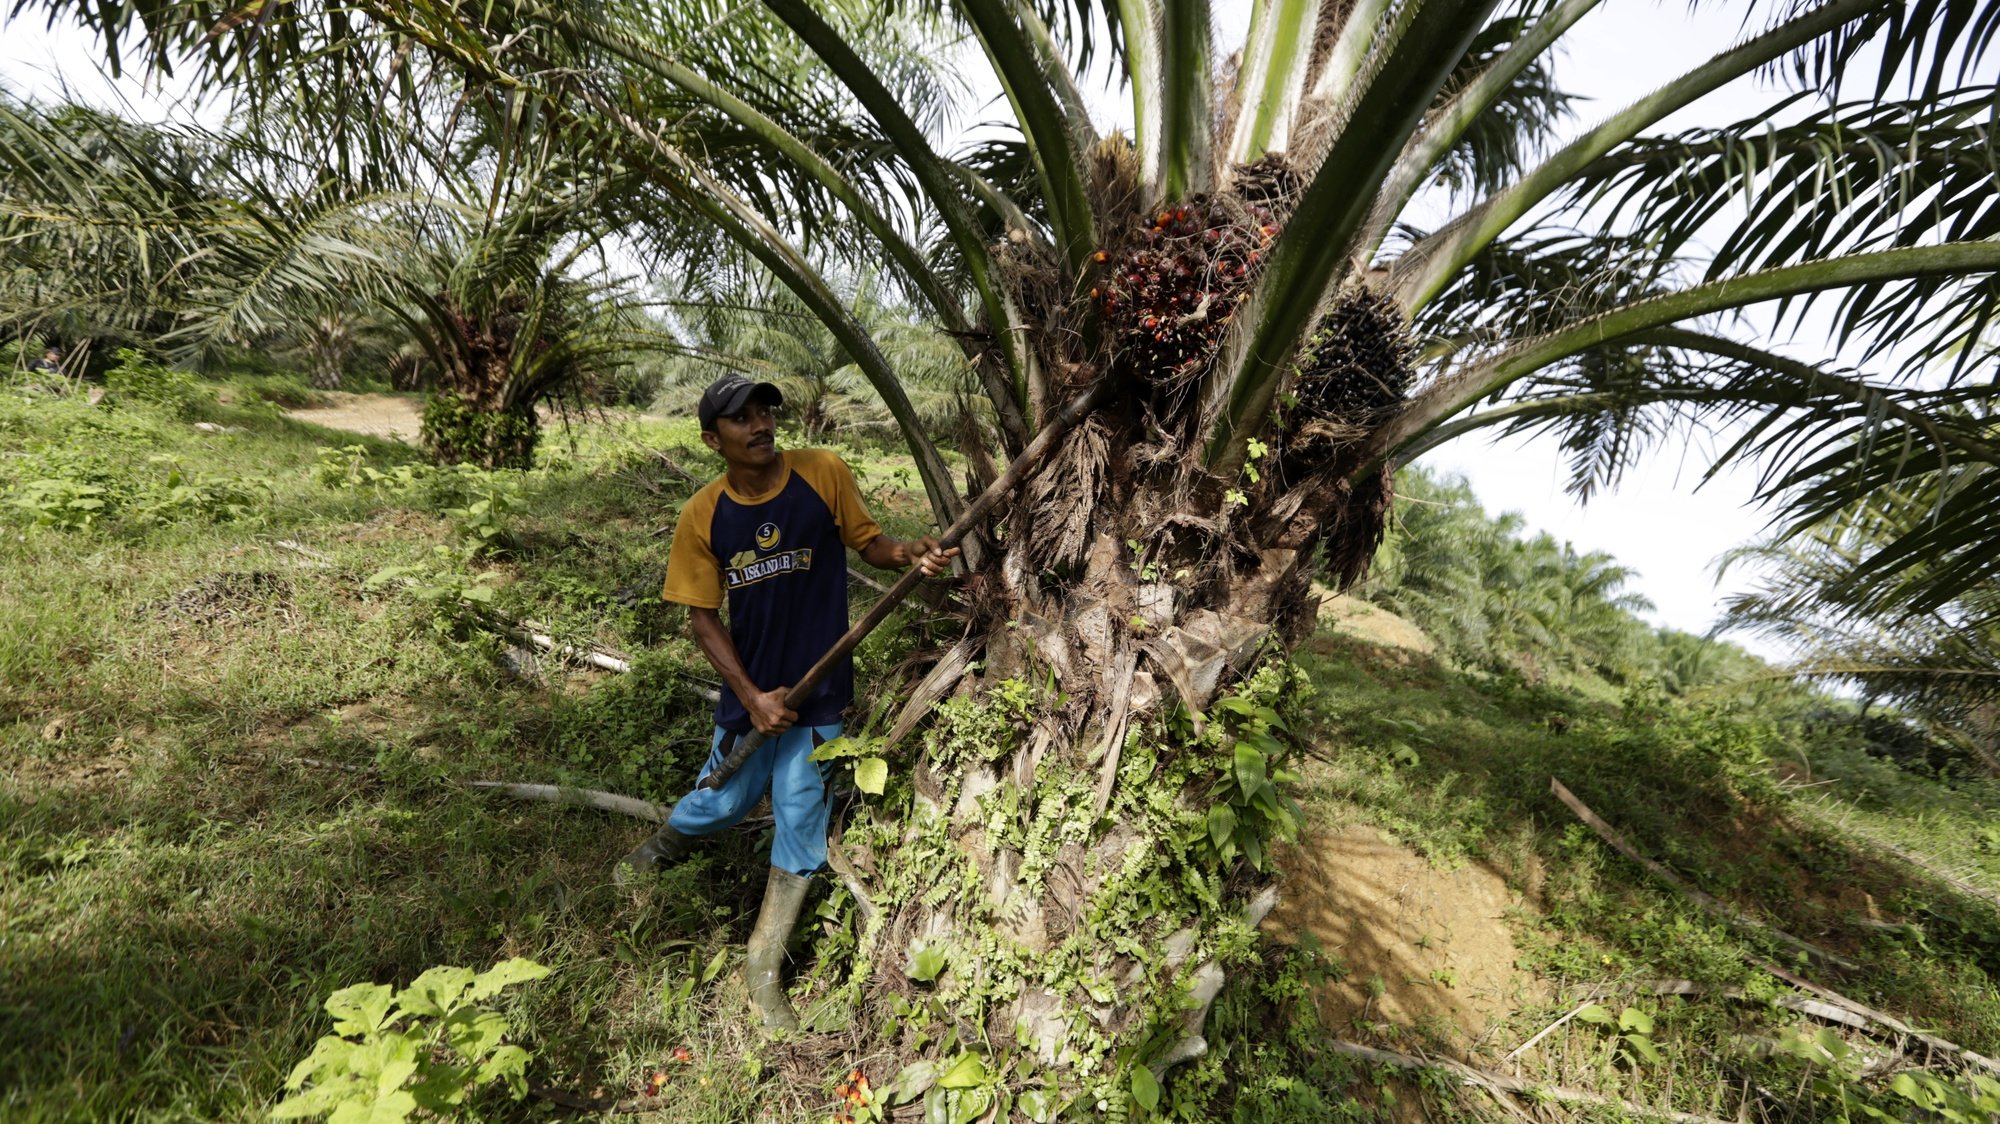 epa07732487 (12/26) A palm oil plantation worker harvests palm fruit in Cot Girek, north Aceh, Indonesia, 11 June 2019. Across Aceh province on the Indonesian island of Sumatra, new plantations and a housing construction boom are threatening the natural environment, pitting humans against the already-critically endangered wild elephants in a fatal conflict which the native Sumatran pachyderm is certain to lose. The elephants’ impending extinction is palpable across the country, but nowhere more so than in Aceh, where only 500 remain in the wild. Clashes in Aceh between elephants and humans are reportedly the highest of anywhere in the country. The opening up of new palm oil plantations, illegal hunting, including for ivory, and large scale illegal logging are the main causes for the increasingly prevalent clashes between humans and elephants in Aceh.  EPA/HOTLI SIMANJUNTAK PLEASE REFER TO THE ADVISORY NOTICE (epa07732475) FOR FULL PACKAGE TEXT